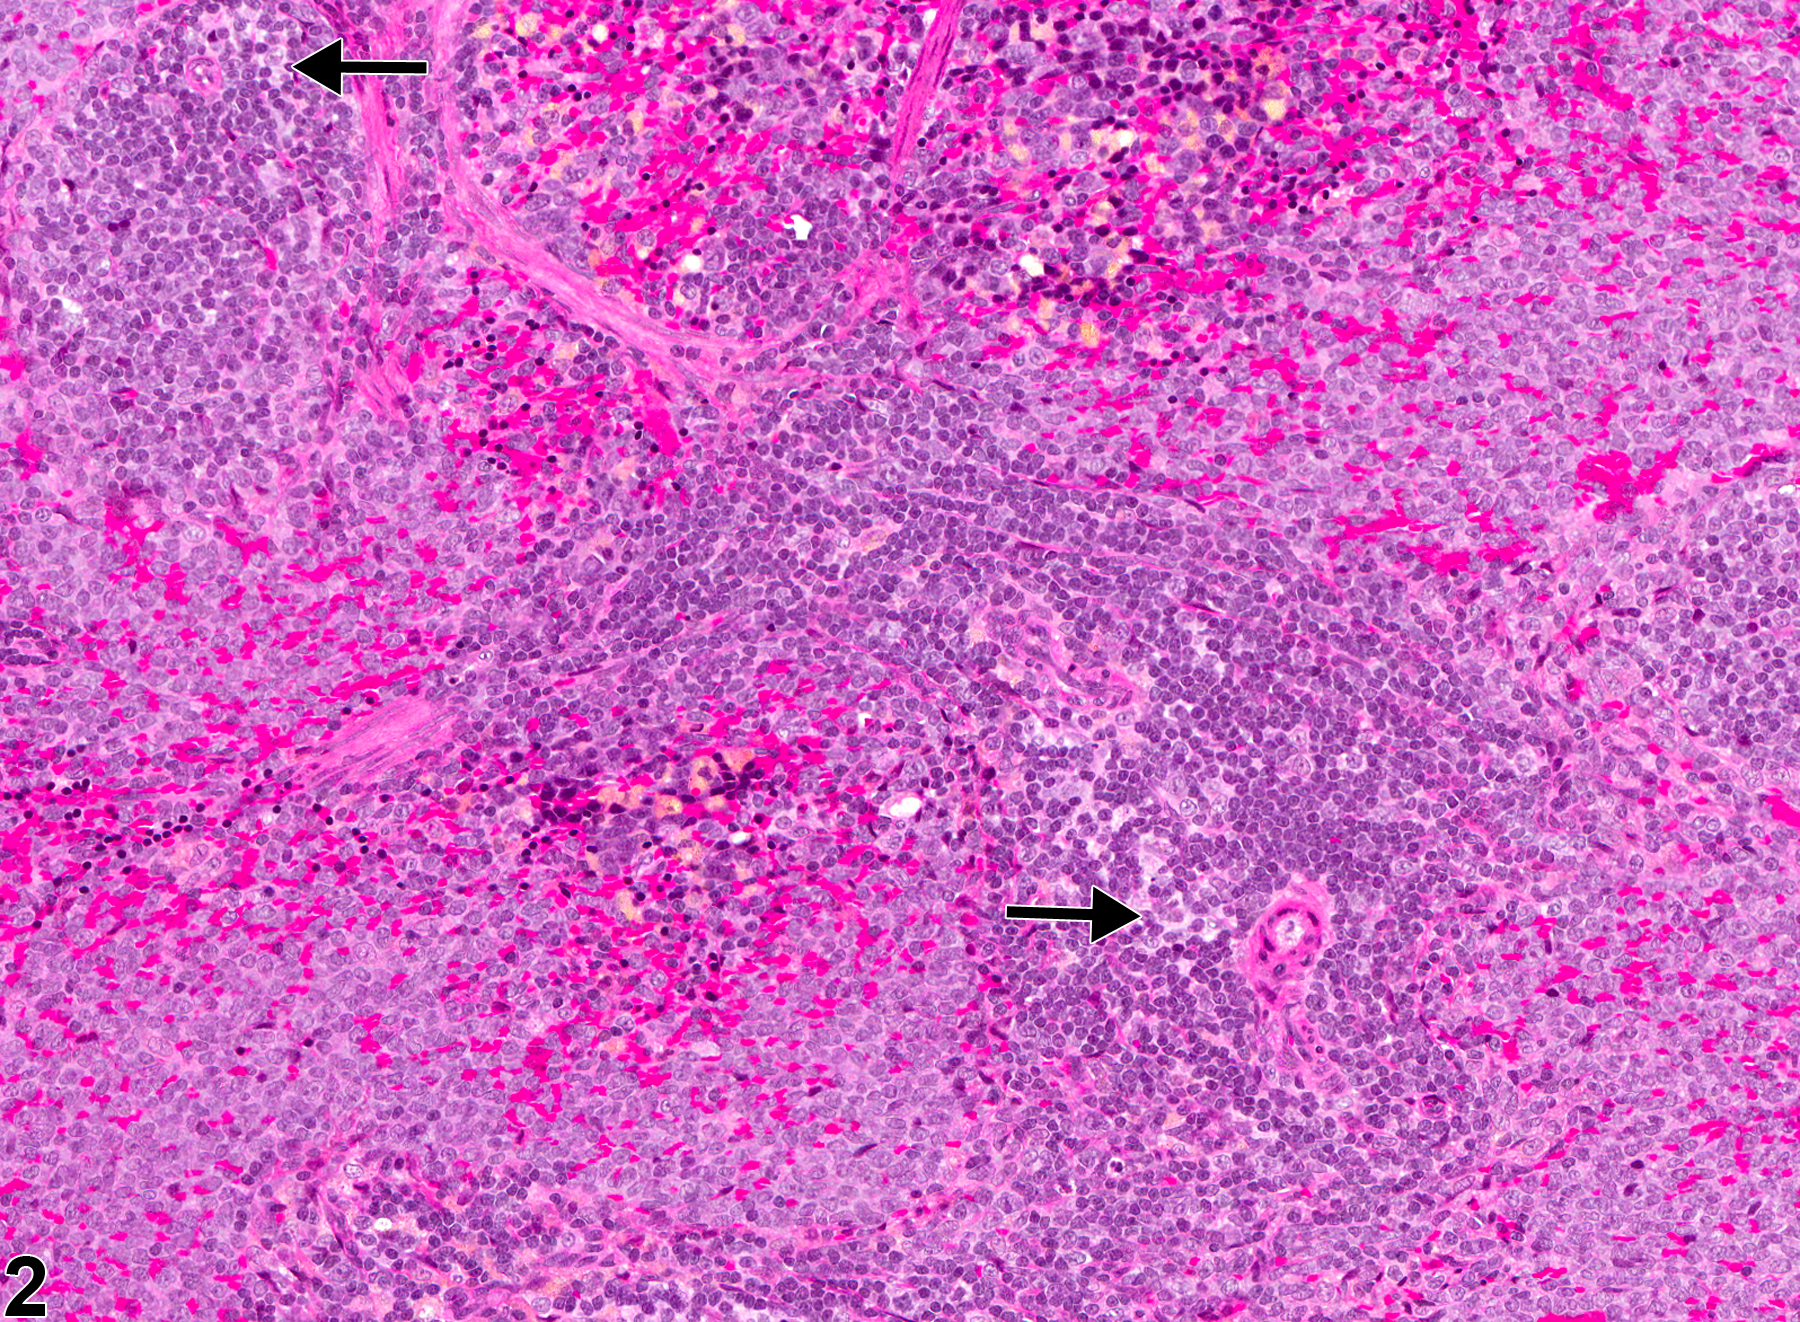 Image of atrophy in the spleen from a female F344/N rat in a subchronic study